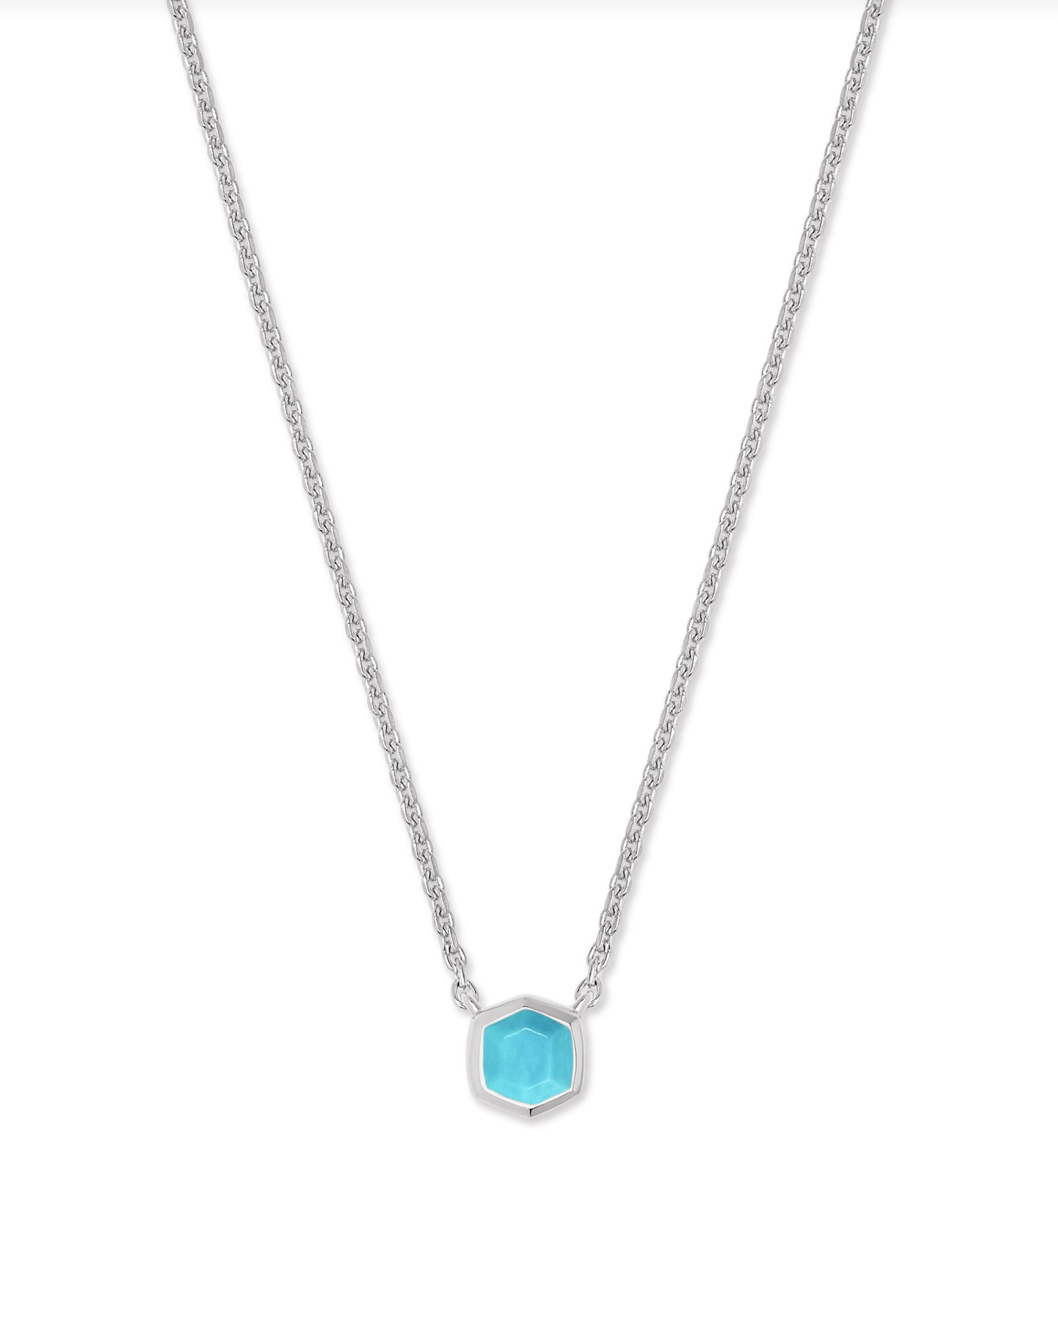 Davie Necklace in Sterling Silver Necklace in Turquoise | December